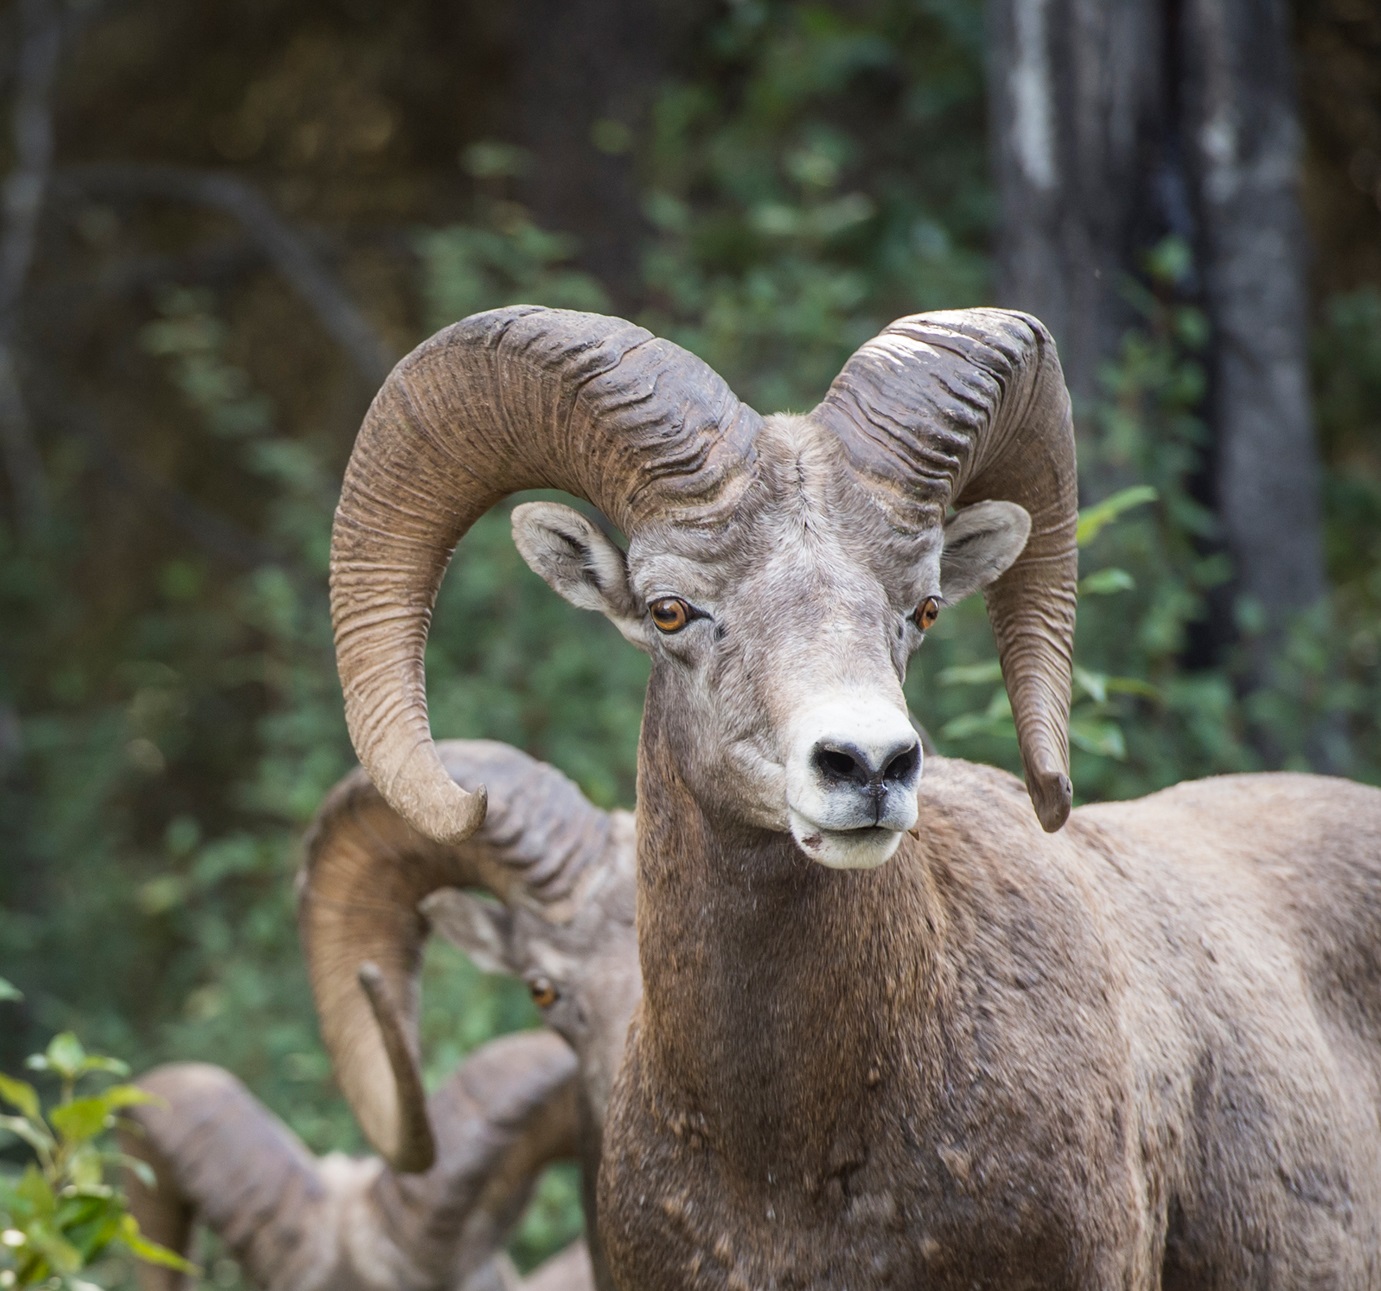 Three bighorn sheep stand one behind another with a forested background.